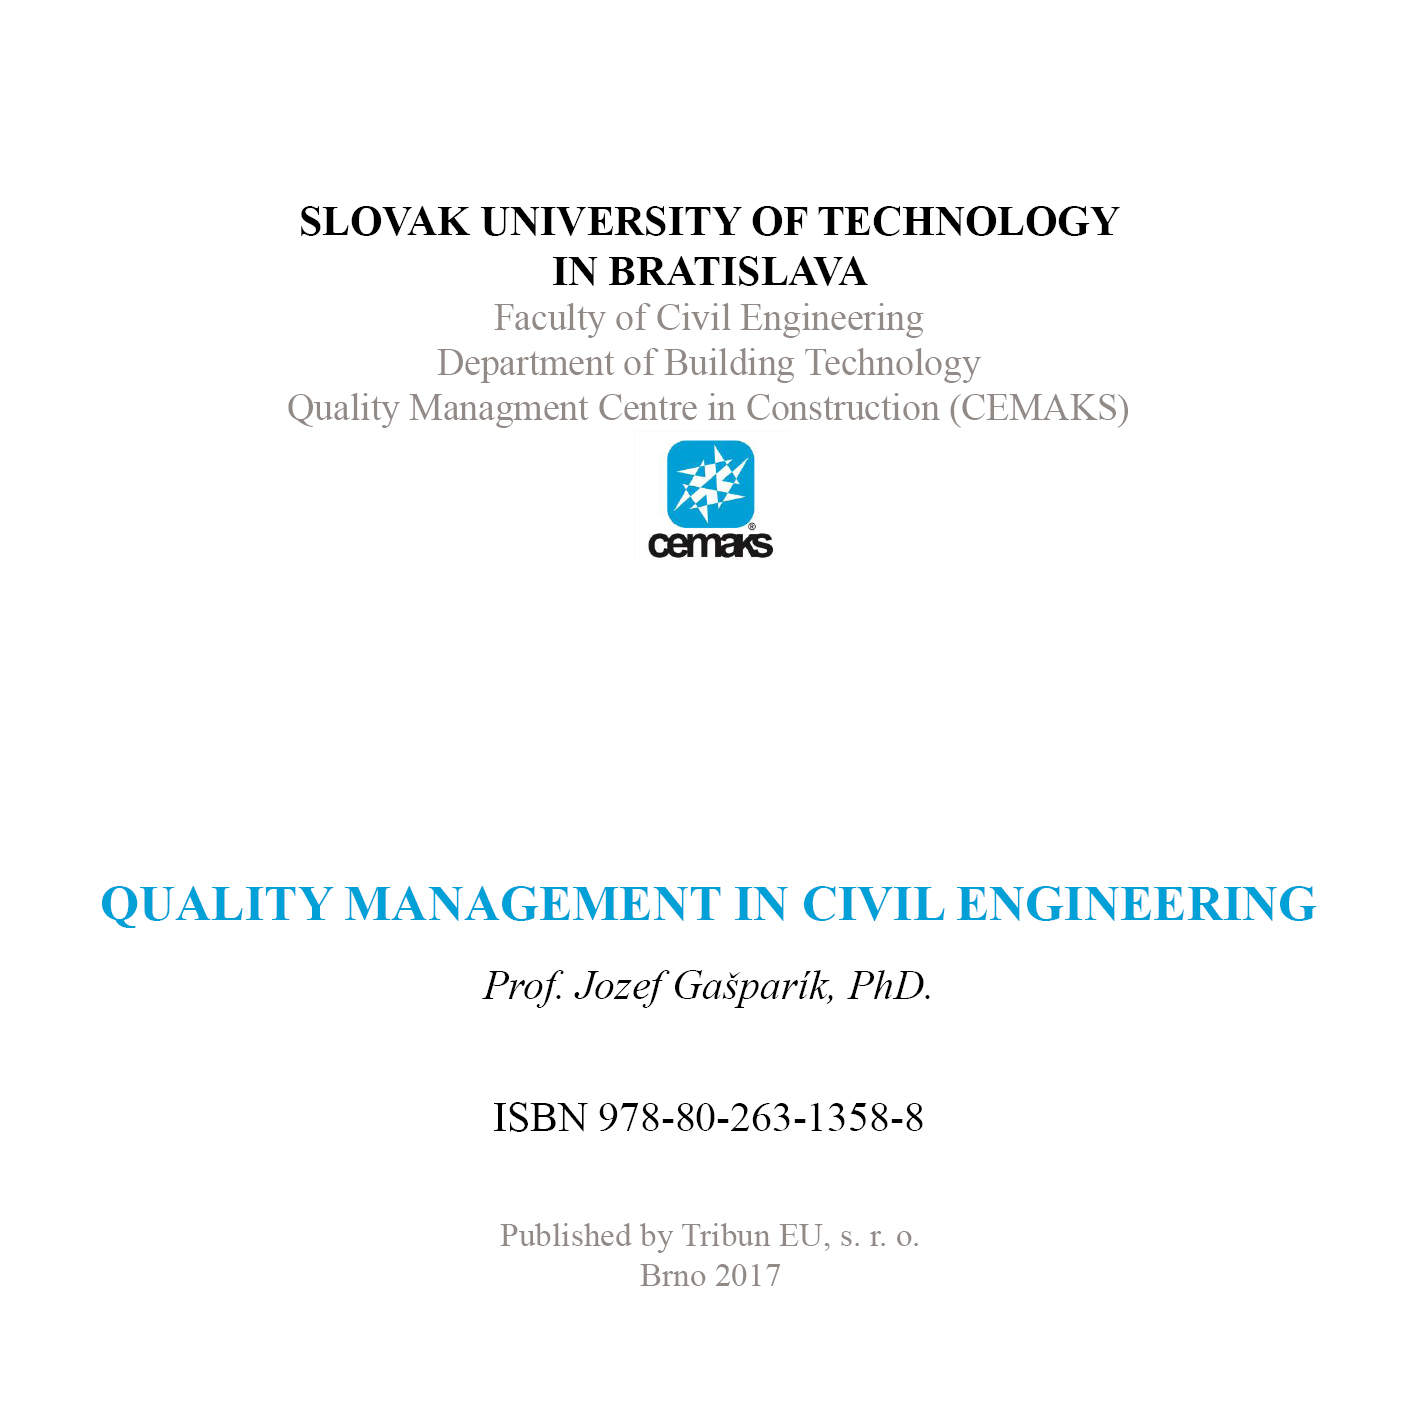 Quality management in civil engineering